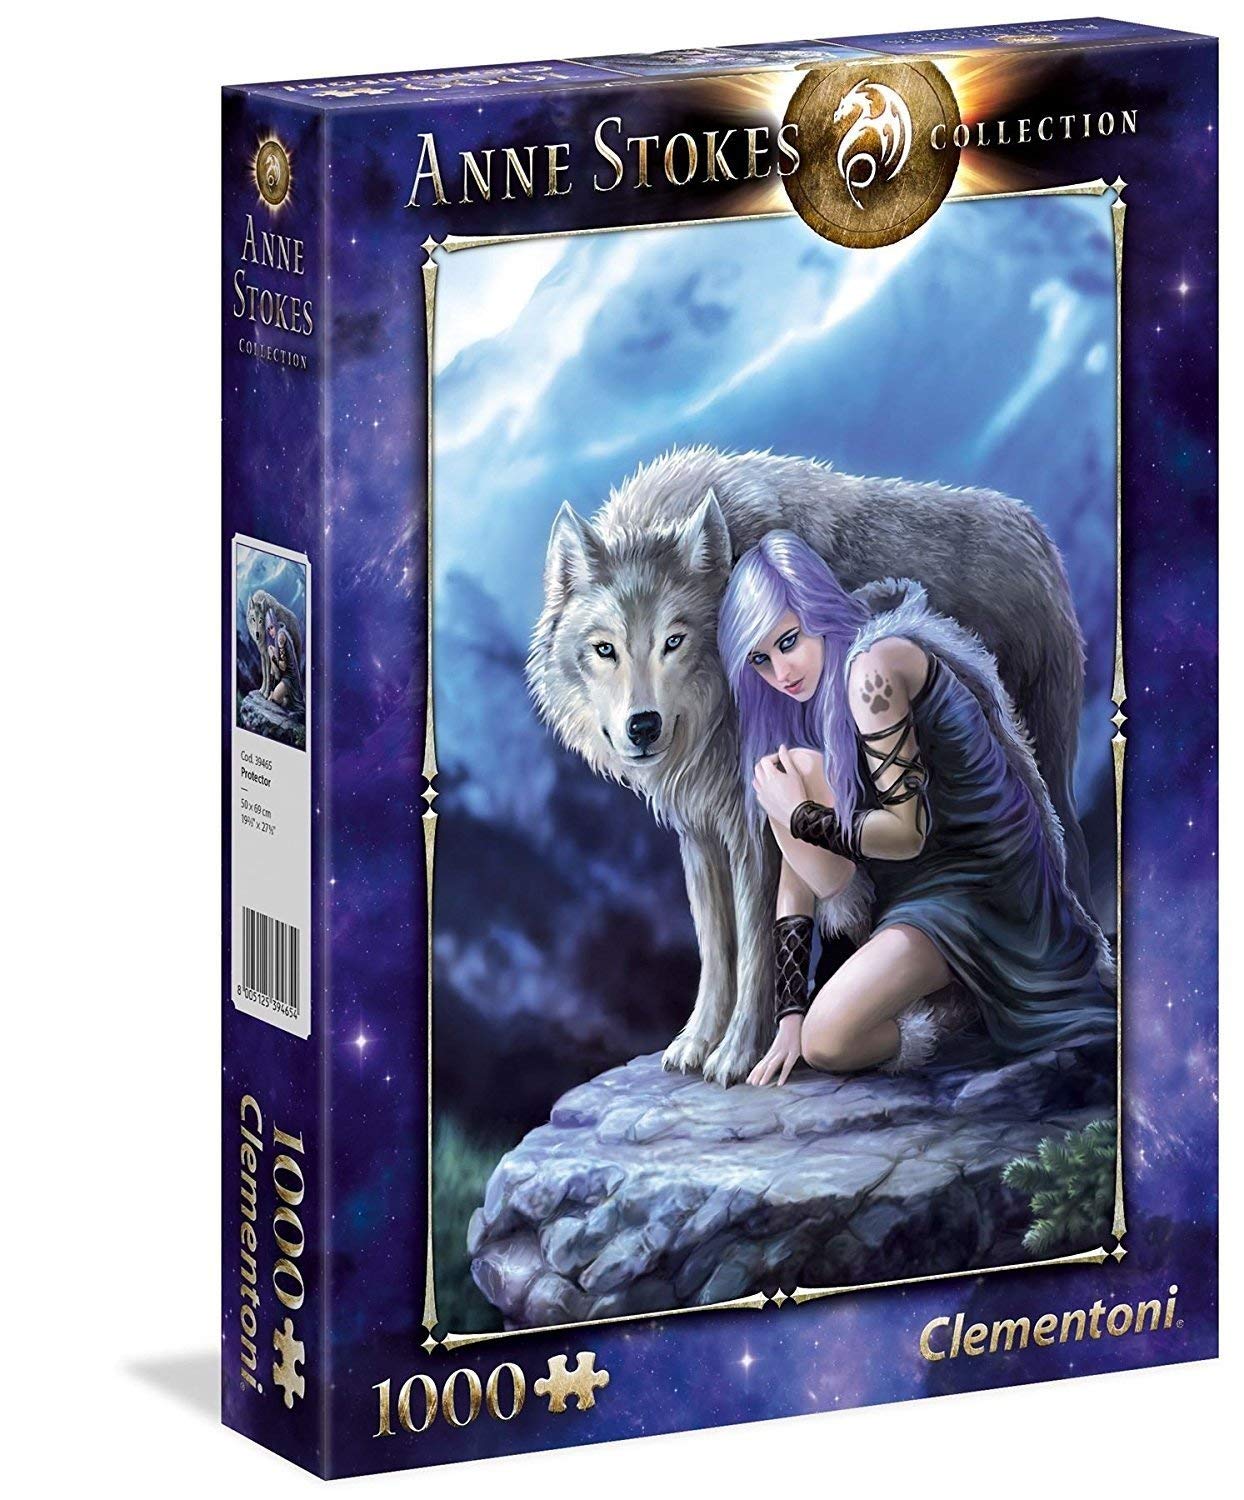 Clementoni Flat Panel Display Anne Stokes Collection